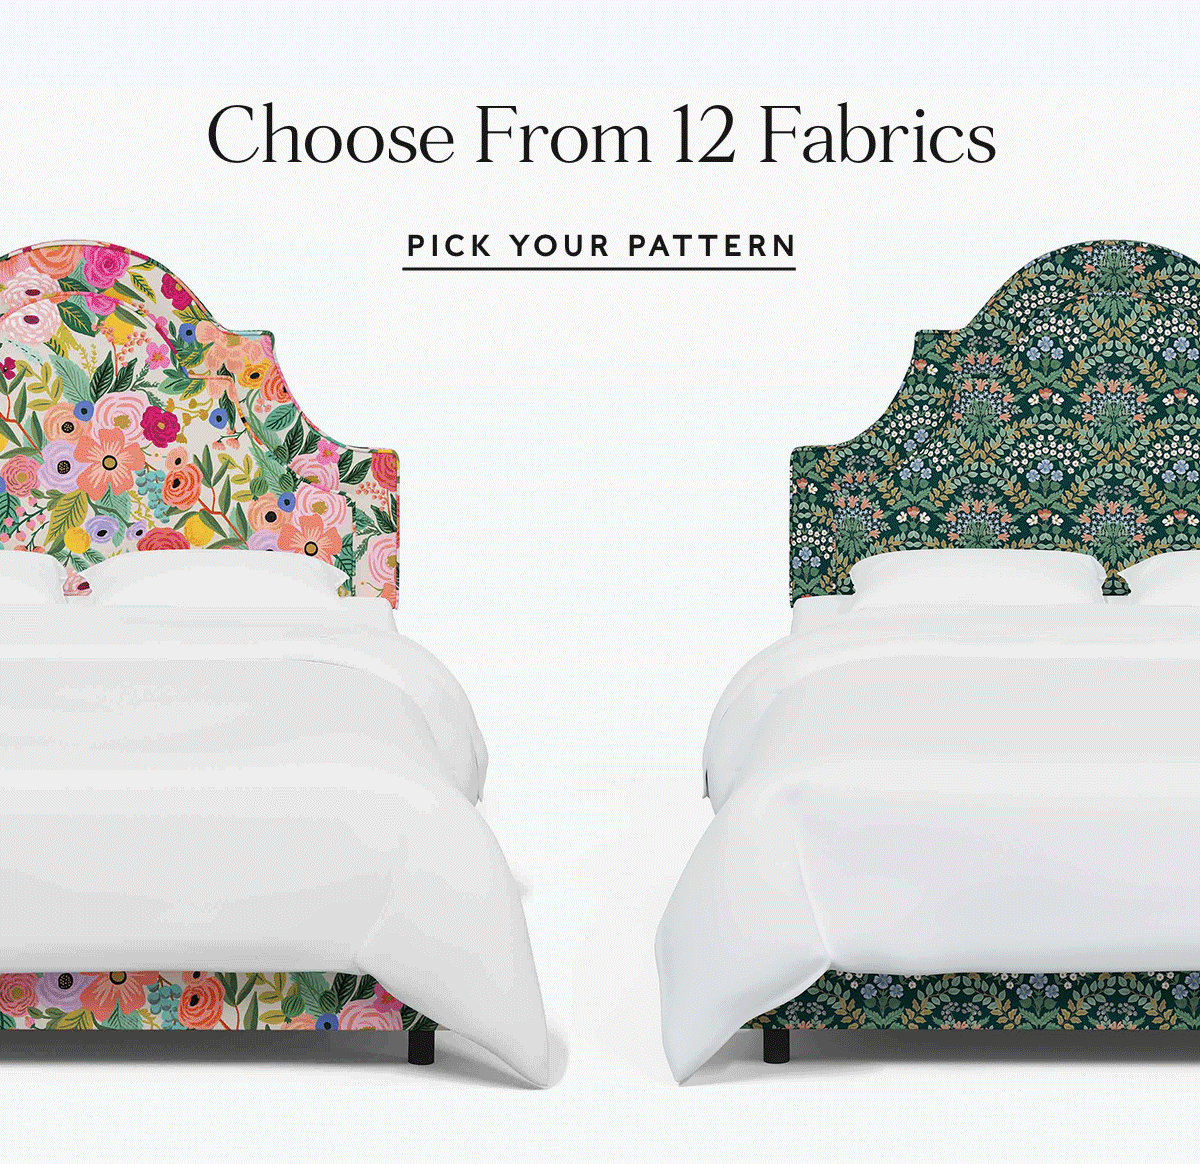 Choose from 12 fabrics. Pick your pattern